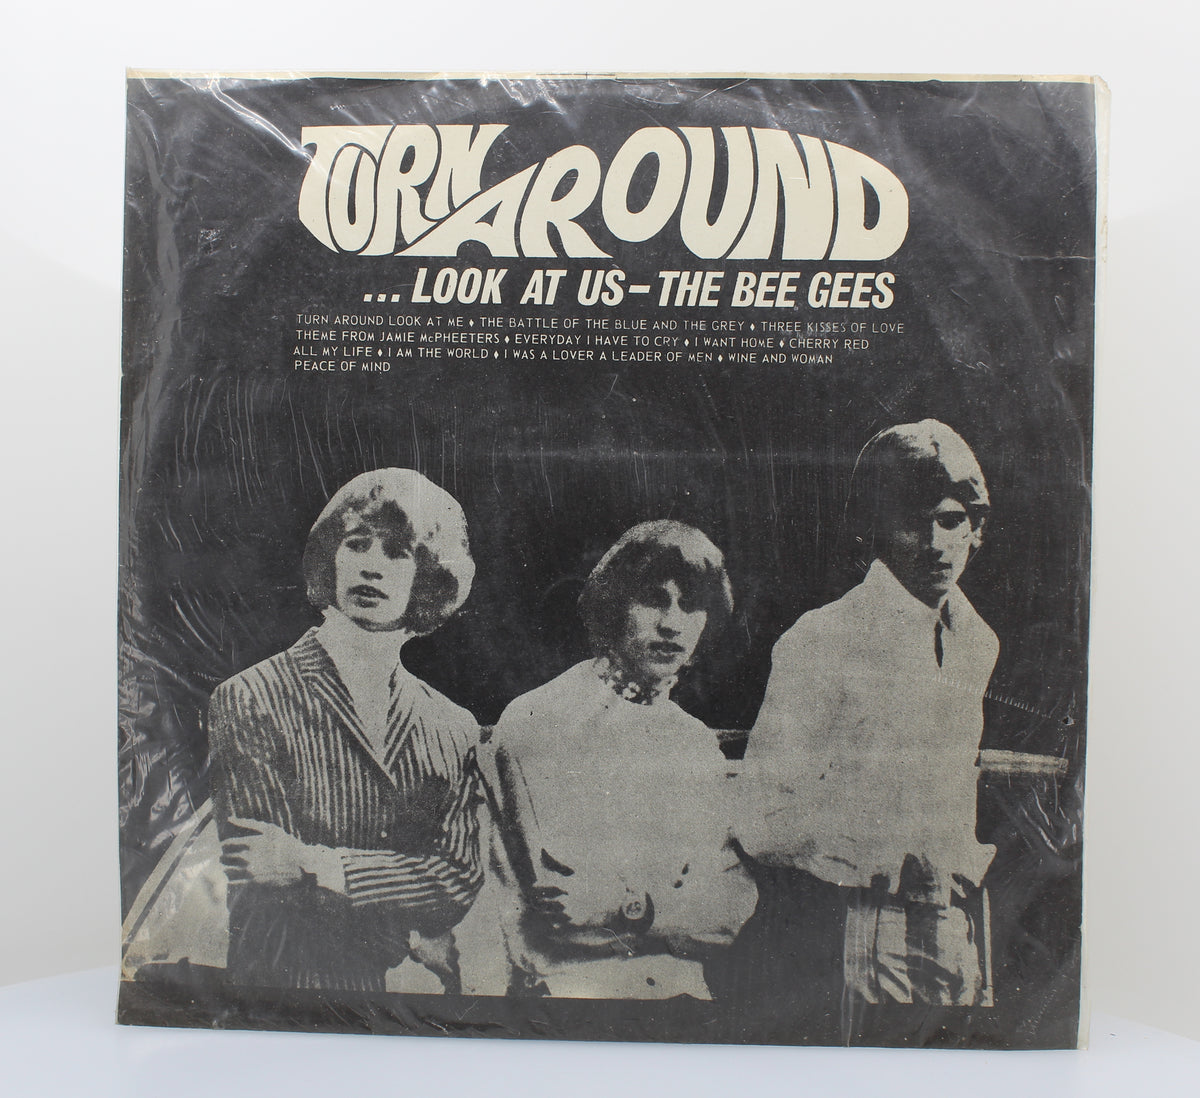 The Bee Gees – Turn Around, Look At Us, Vinyl, LP, Compilation, Unofficial Release, Taiwan 1967